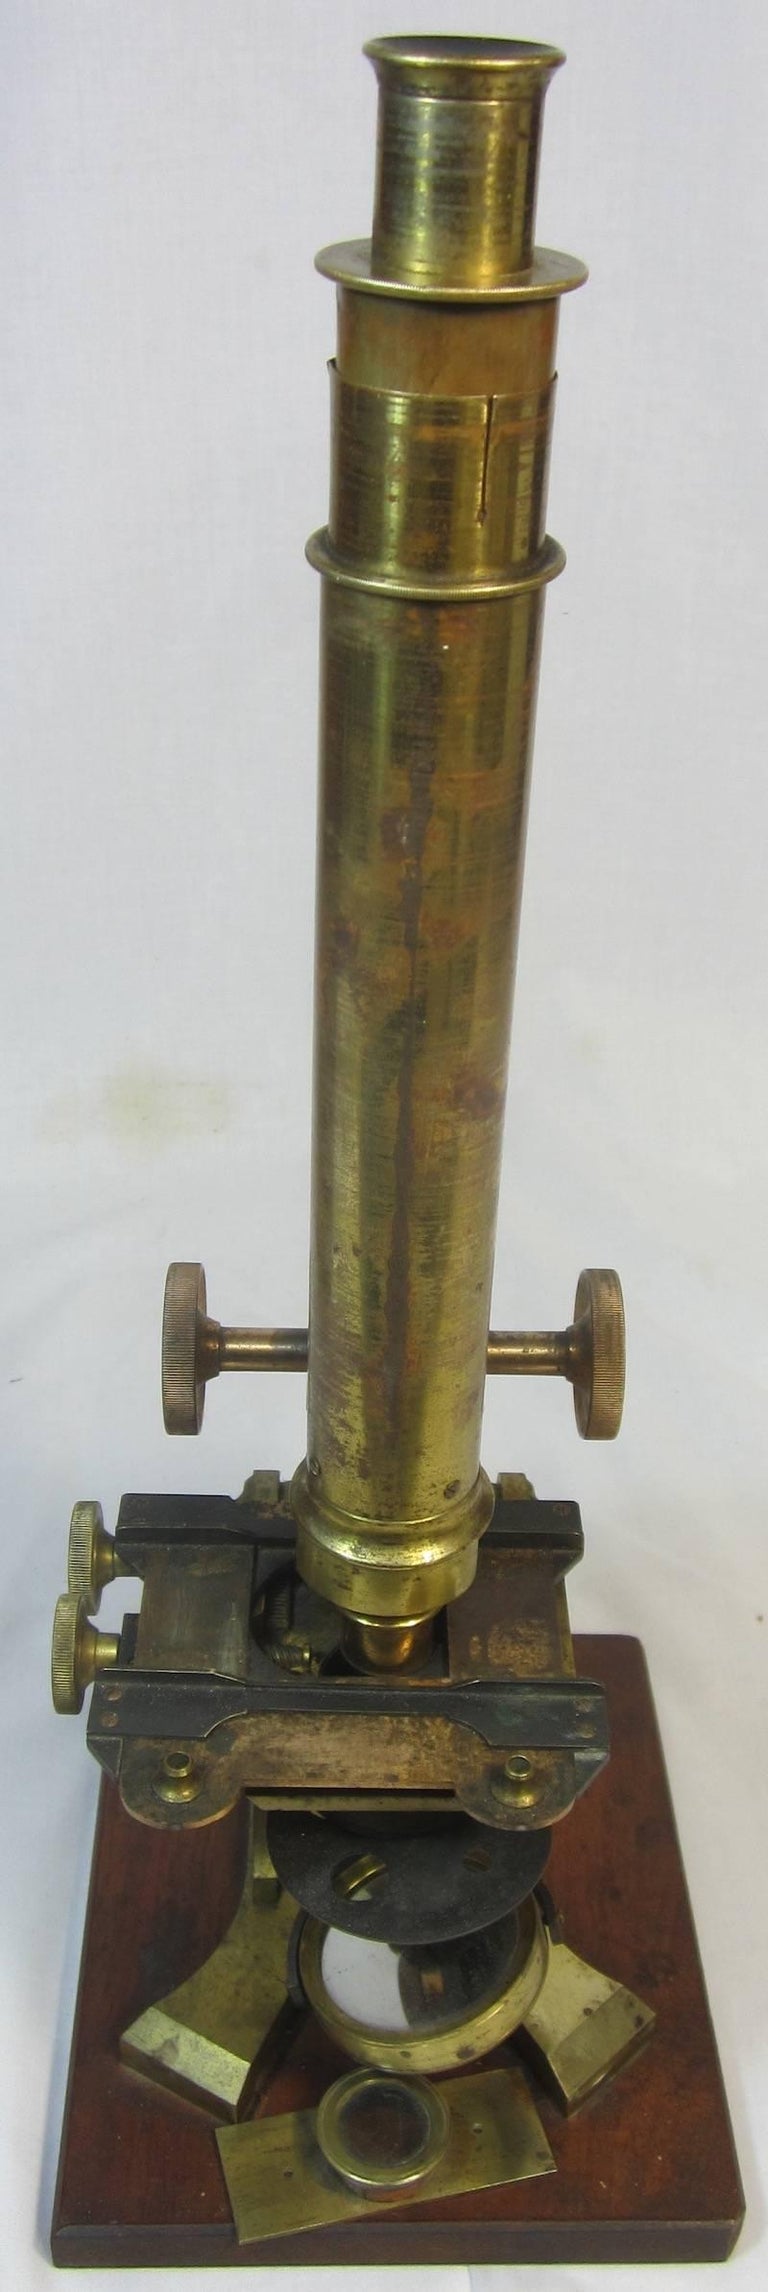 Antique Brass Microscope For Sale at 1stdibs